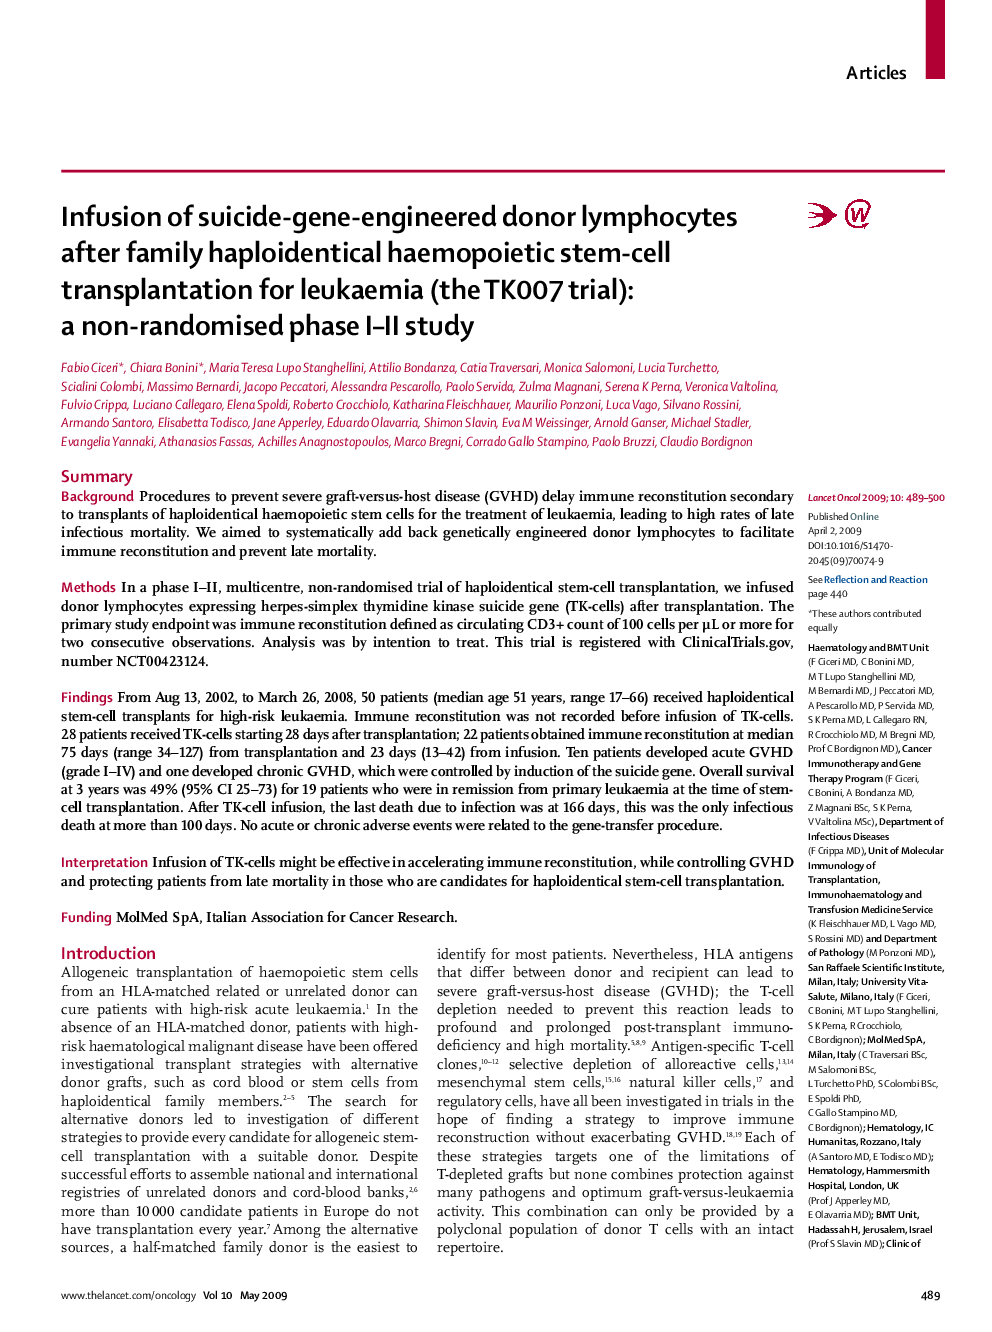 Infusion of suicide-gene-engineered donor lymphocytes after family haploidentical haemopoietic stem-cell transplantation for leukaemia (the TK007 trial): a non-randomised phase I–II study